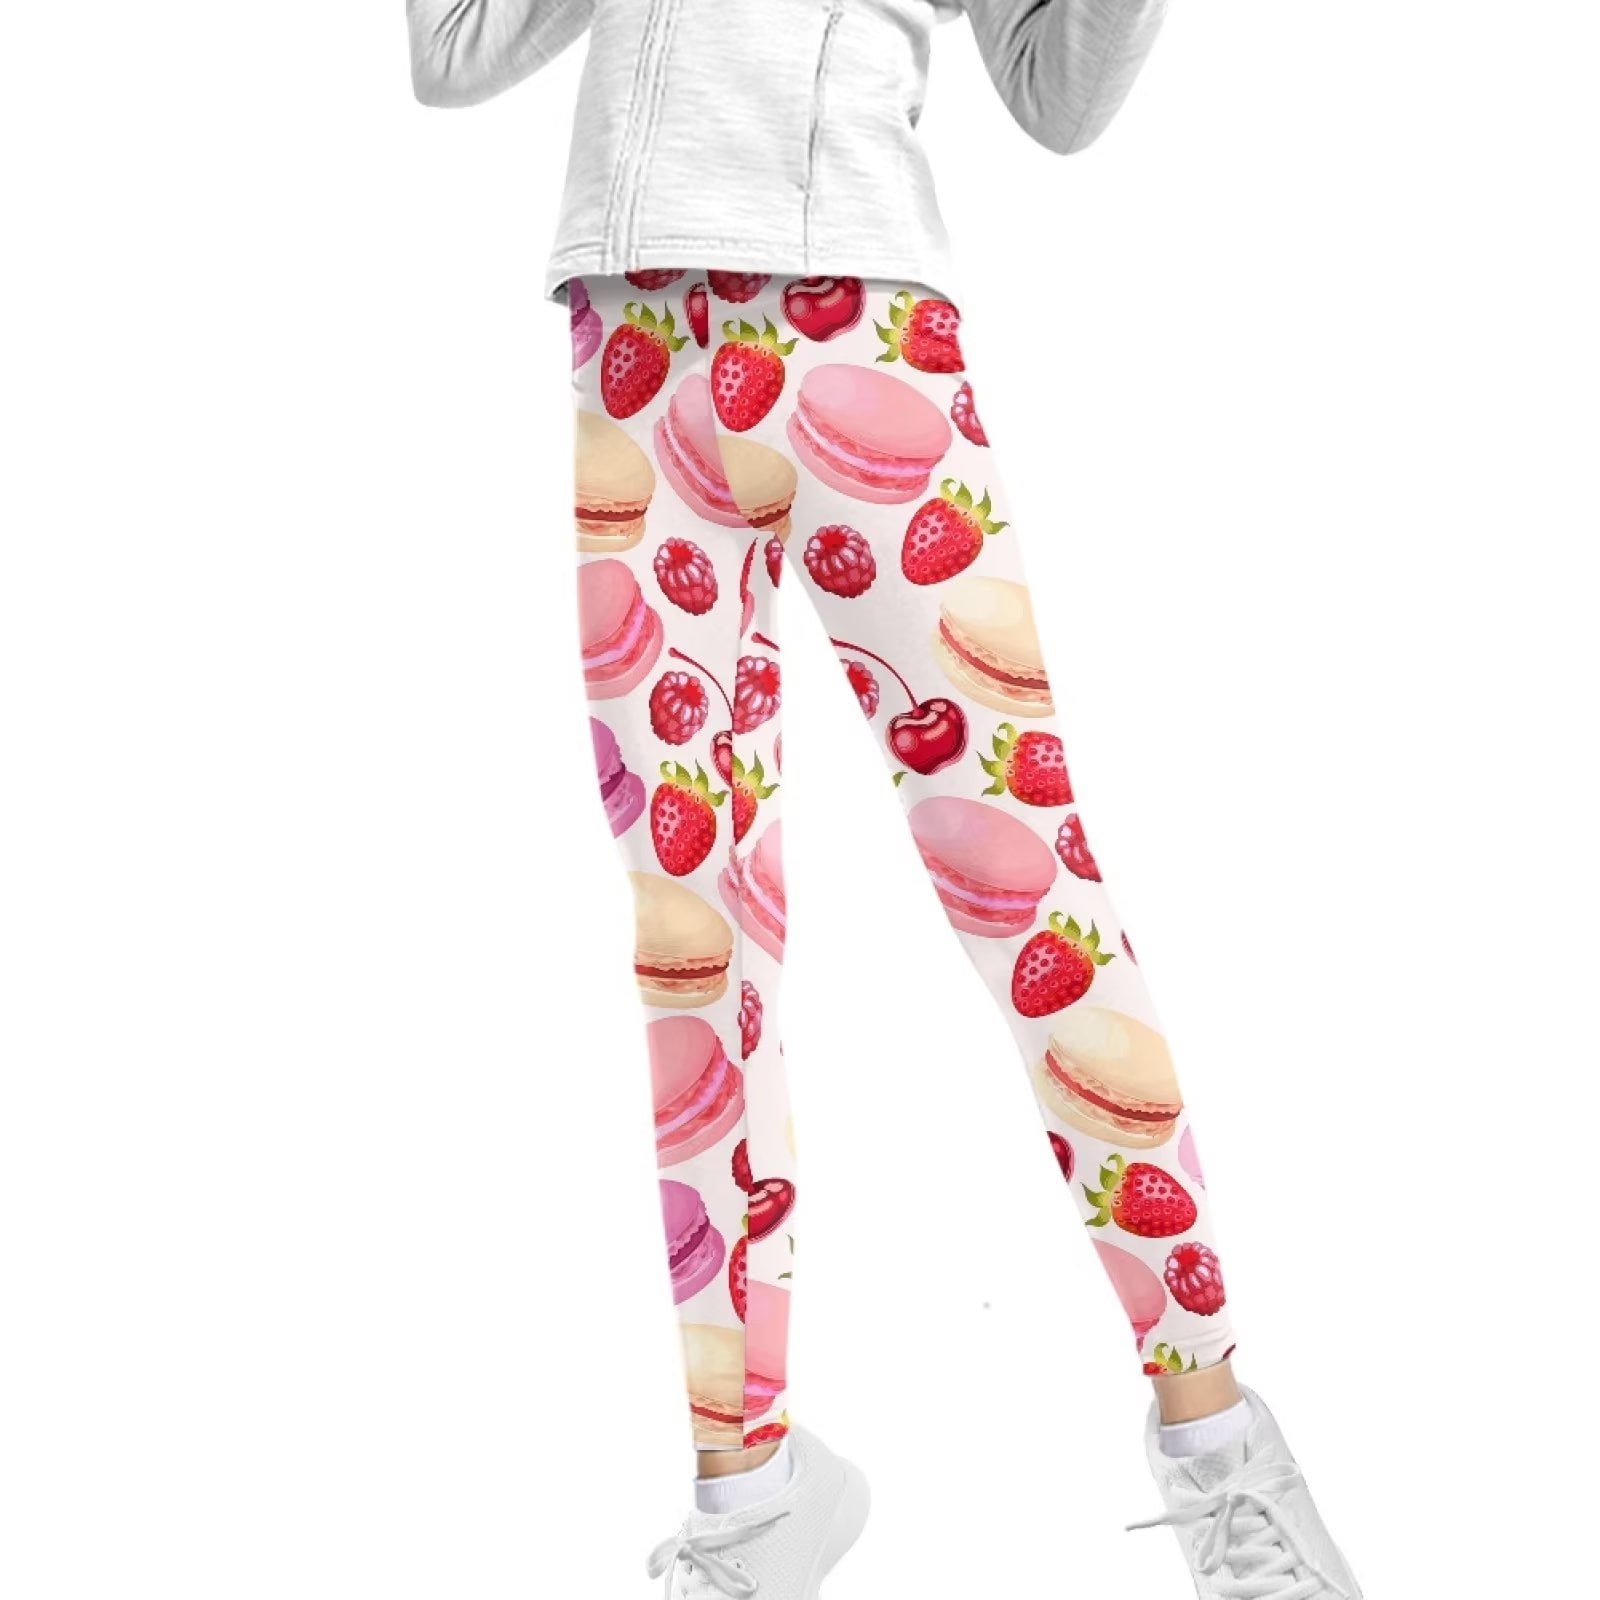 FKELYI Girls Leggings with Strawberry Size 4-5 Years Comfortable Playing  Kids Tights Pink Stretchy School Yoga Pants High Waisted Yummy Control